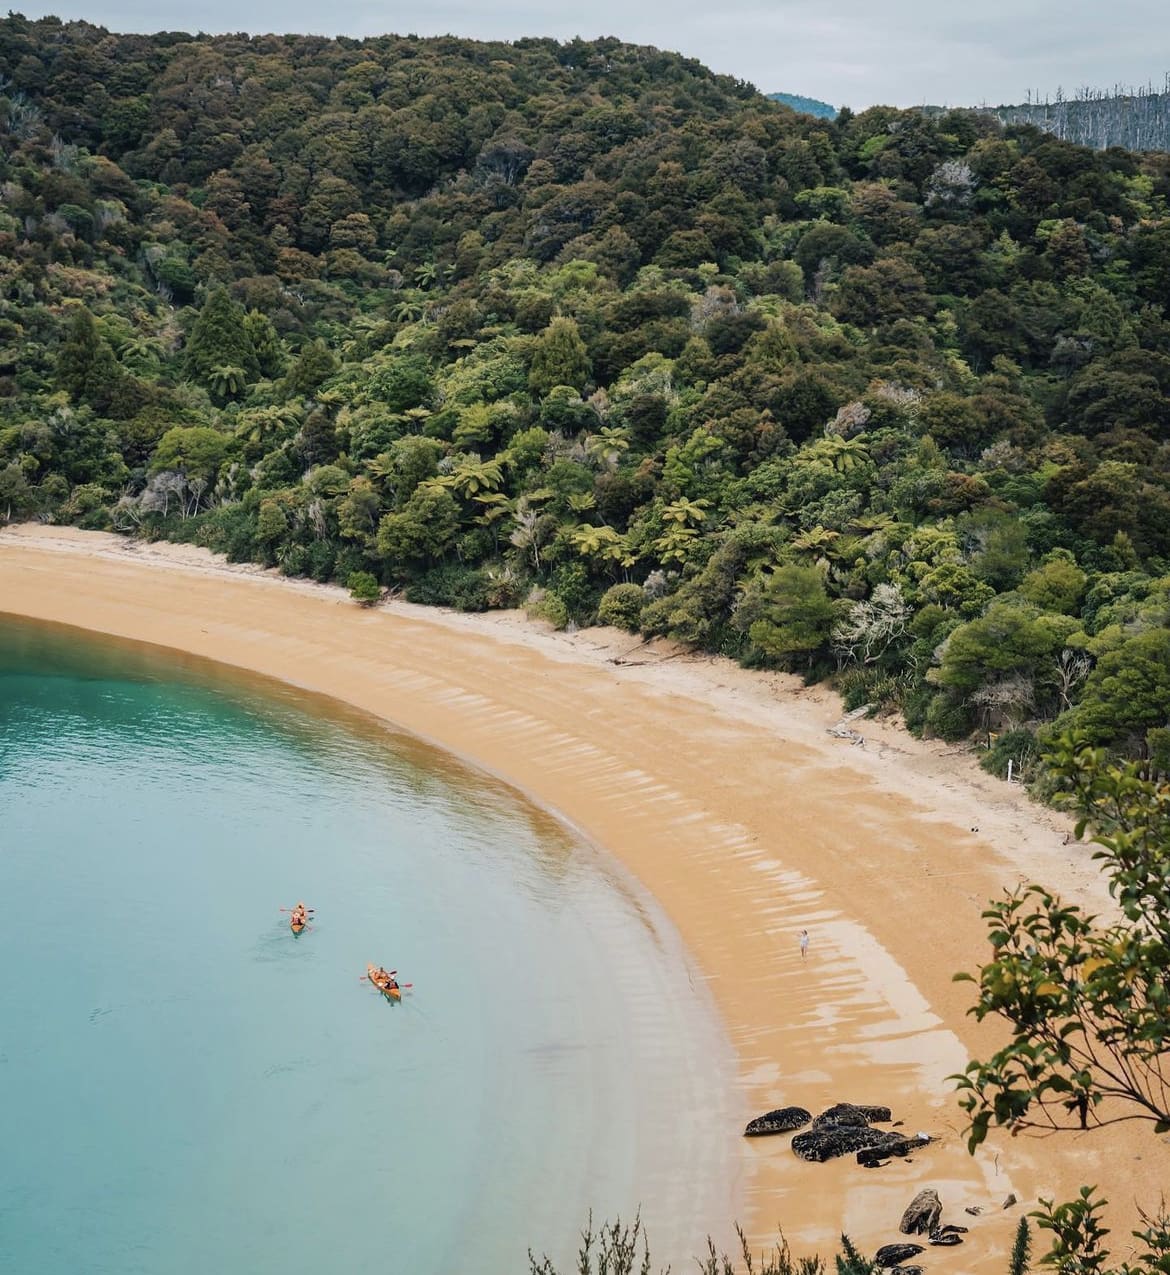 The ristine beaches at Abel Tasman National Park are a must-see place to visit in New Zealand